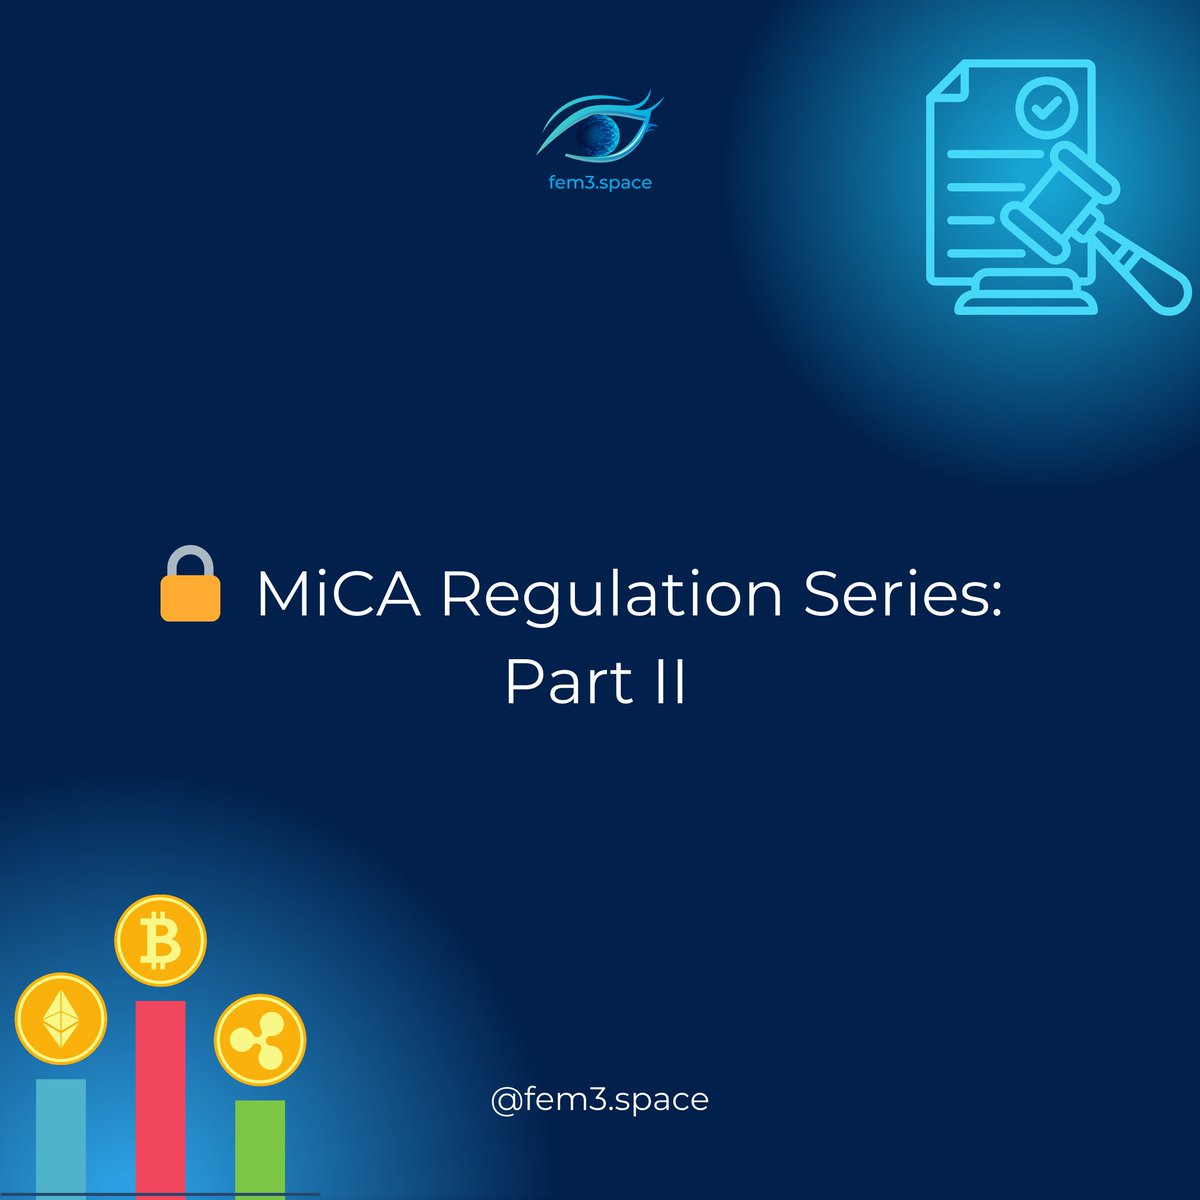 1/7
Let's unlock the immense potential of digital currencies while ensuring a safer and more regulated future, by learning with the MiCA legal series, powered by fem3.space.

Today - Part II ⬇️

#EURegulation #CryptoAdvancements #SafeAndSecureJourney